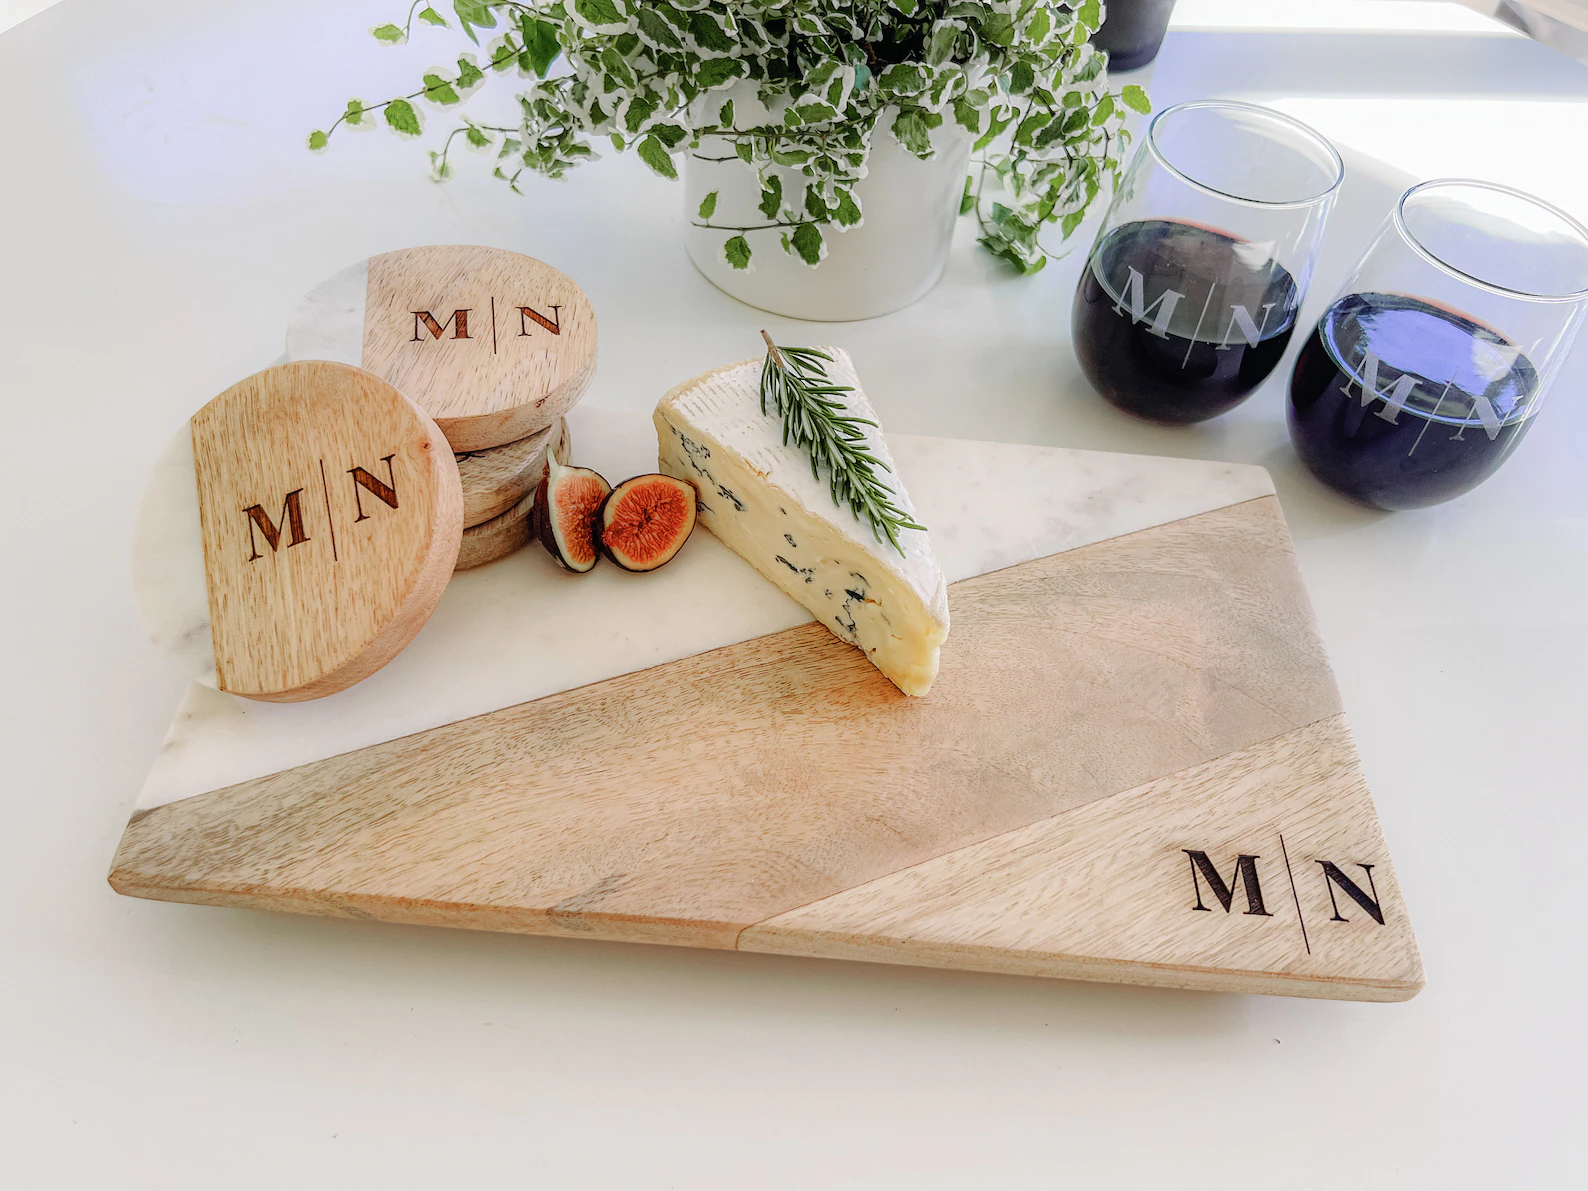 Cheese plated on personalized charcuterie board with matching coasters and wine glasses